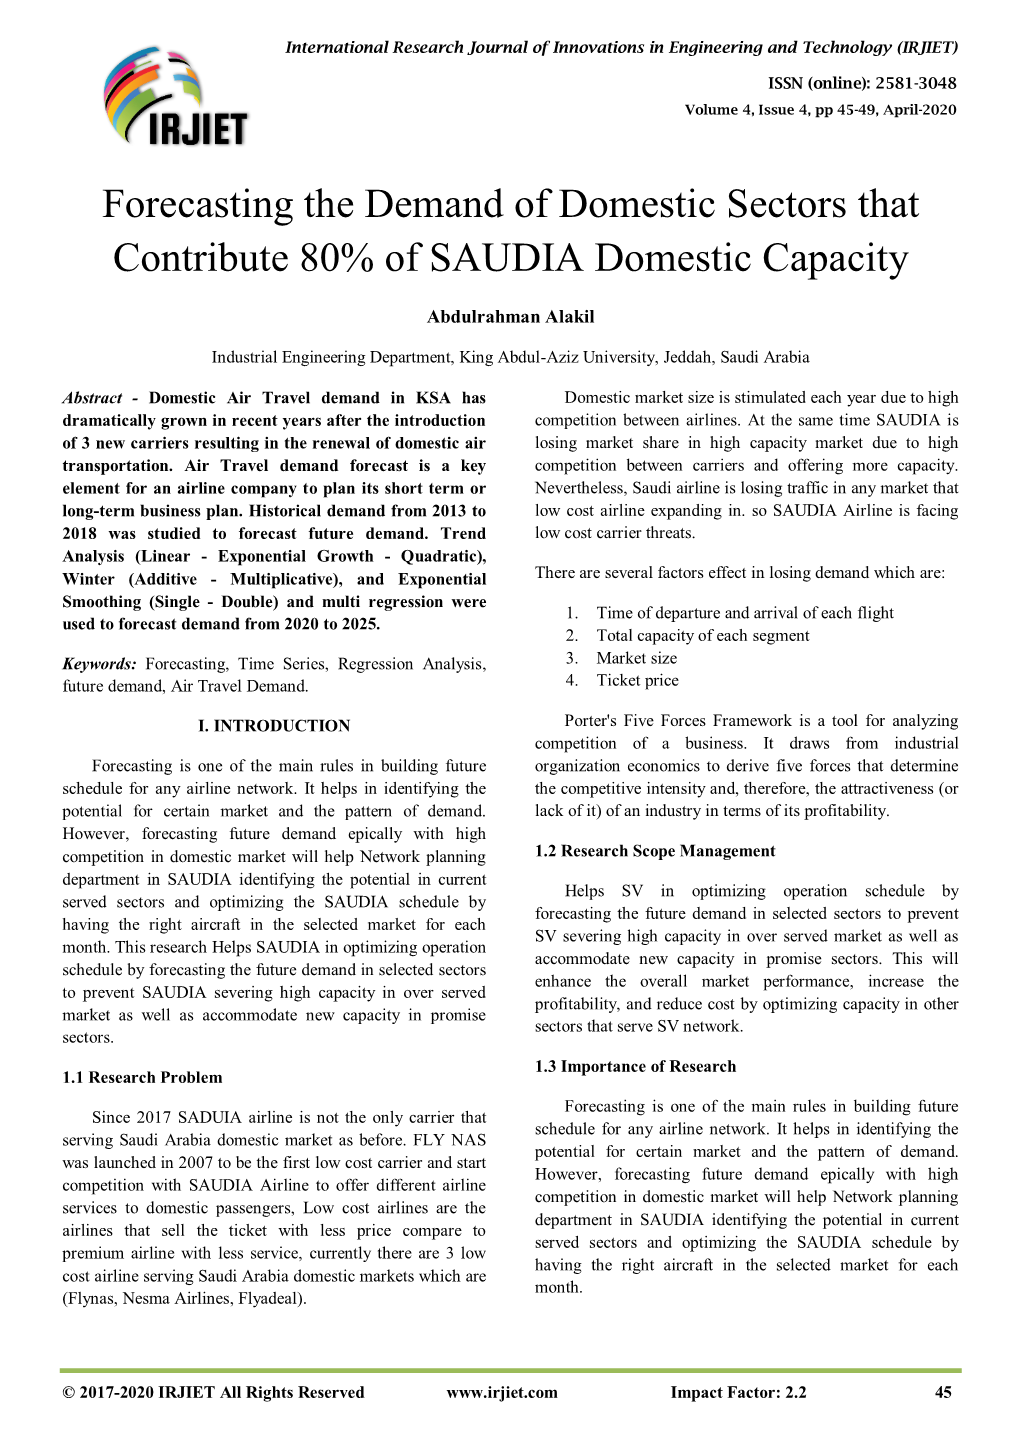 Forecasting the Demand of Domestic Sectors That Contribute 80% of SAUDIA Domestic Capacity